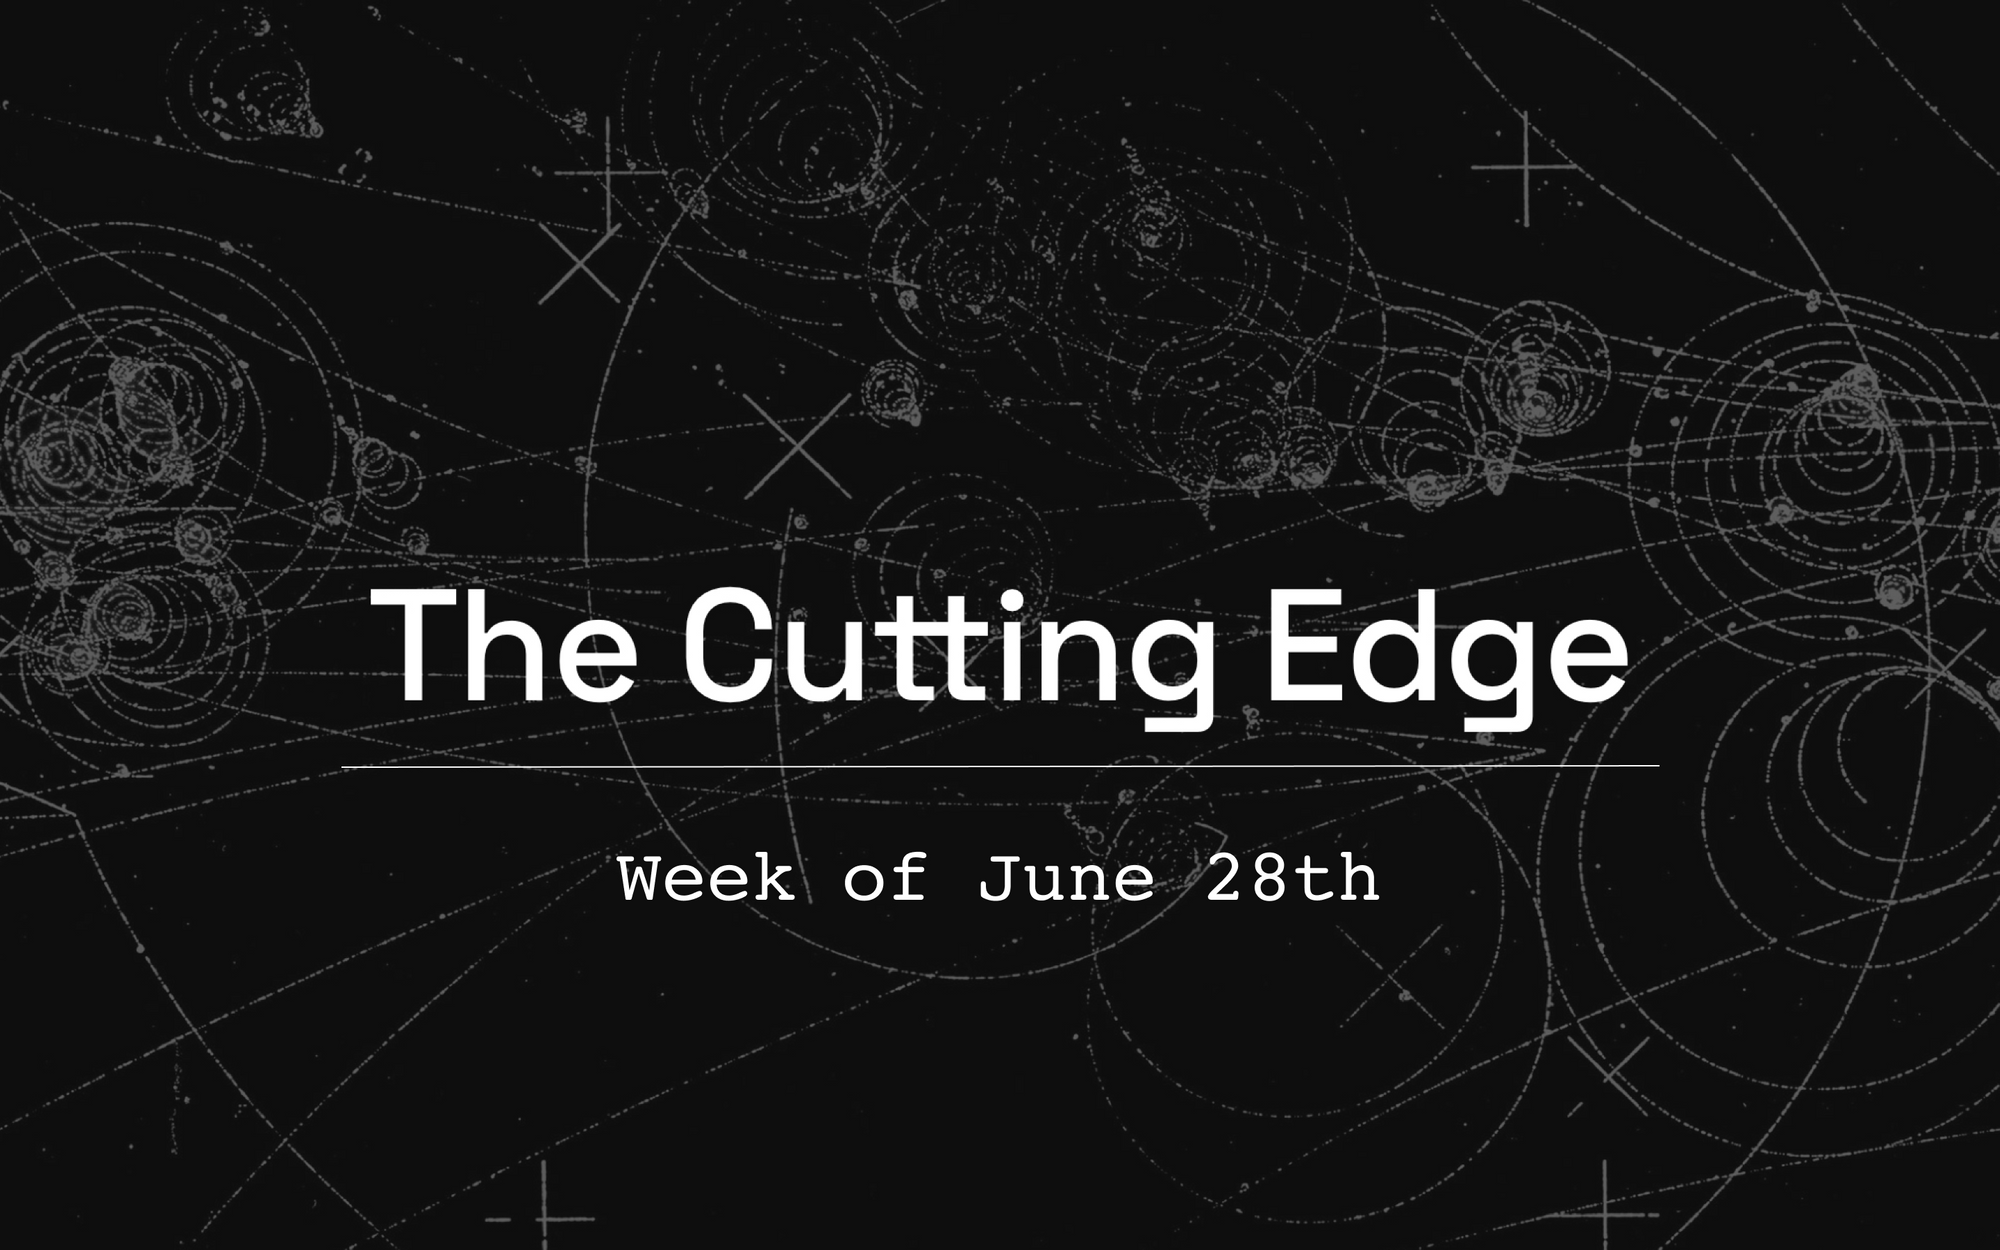 The Cutting Edge: Week of June 28th